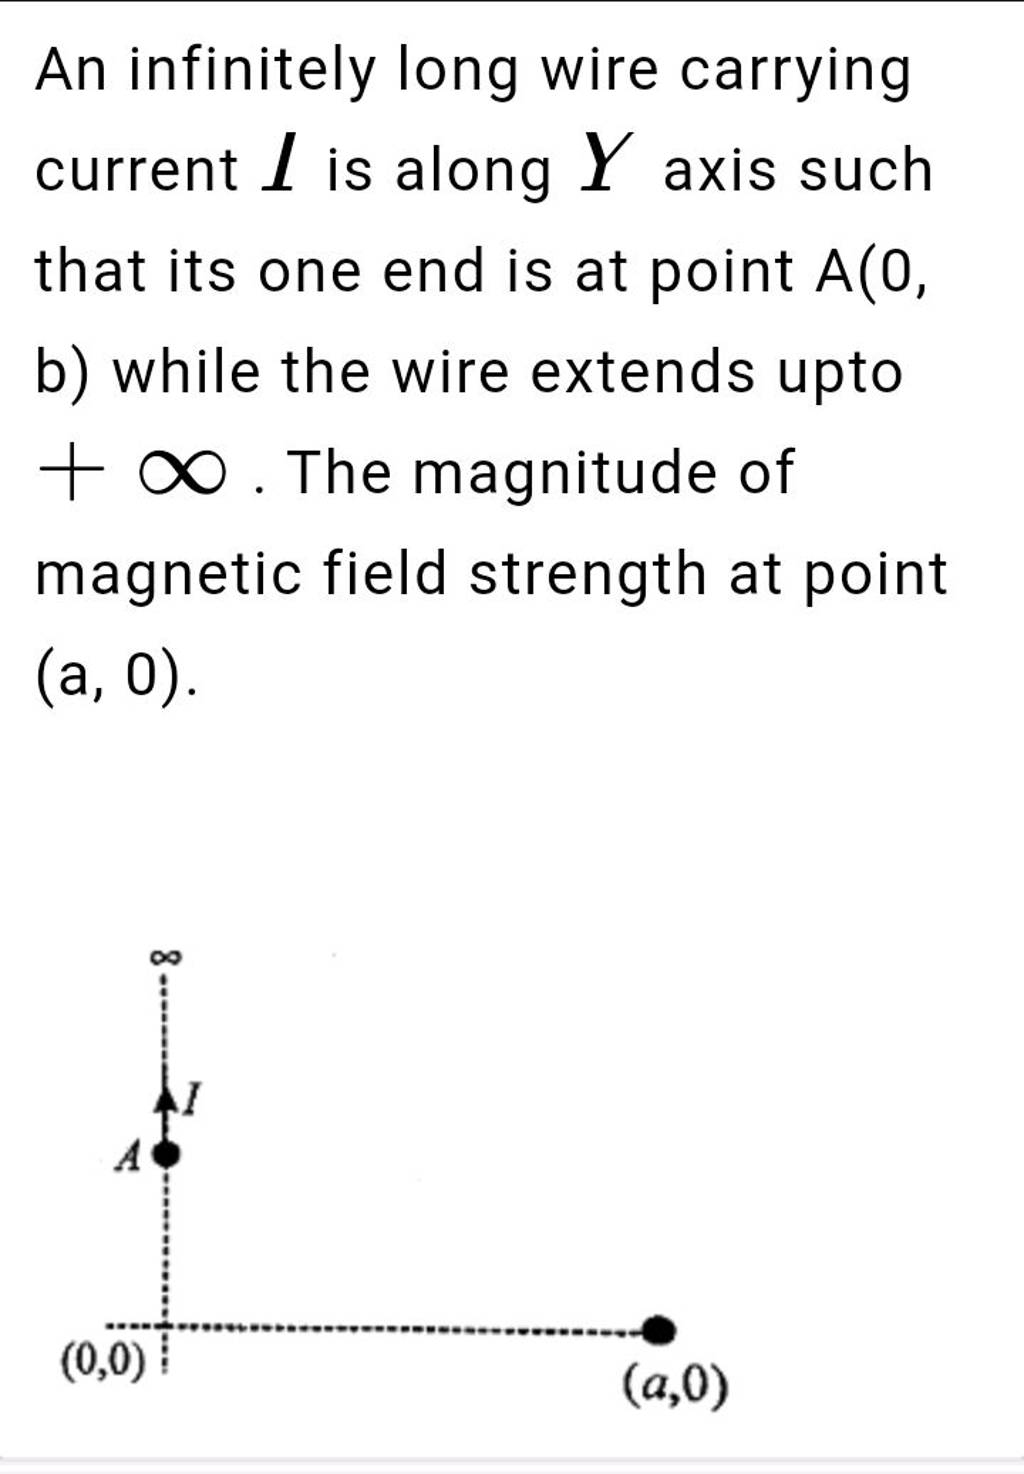 An infinitely long wire carrying current oldsymbol{L} is along oldsy